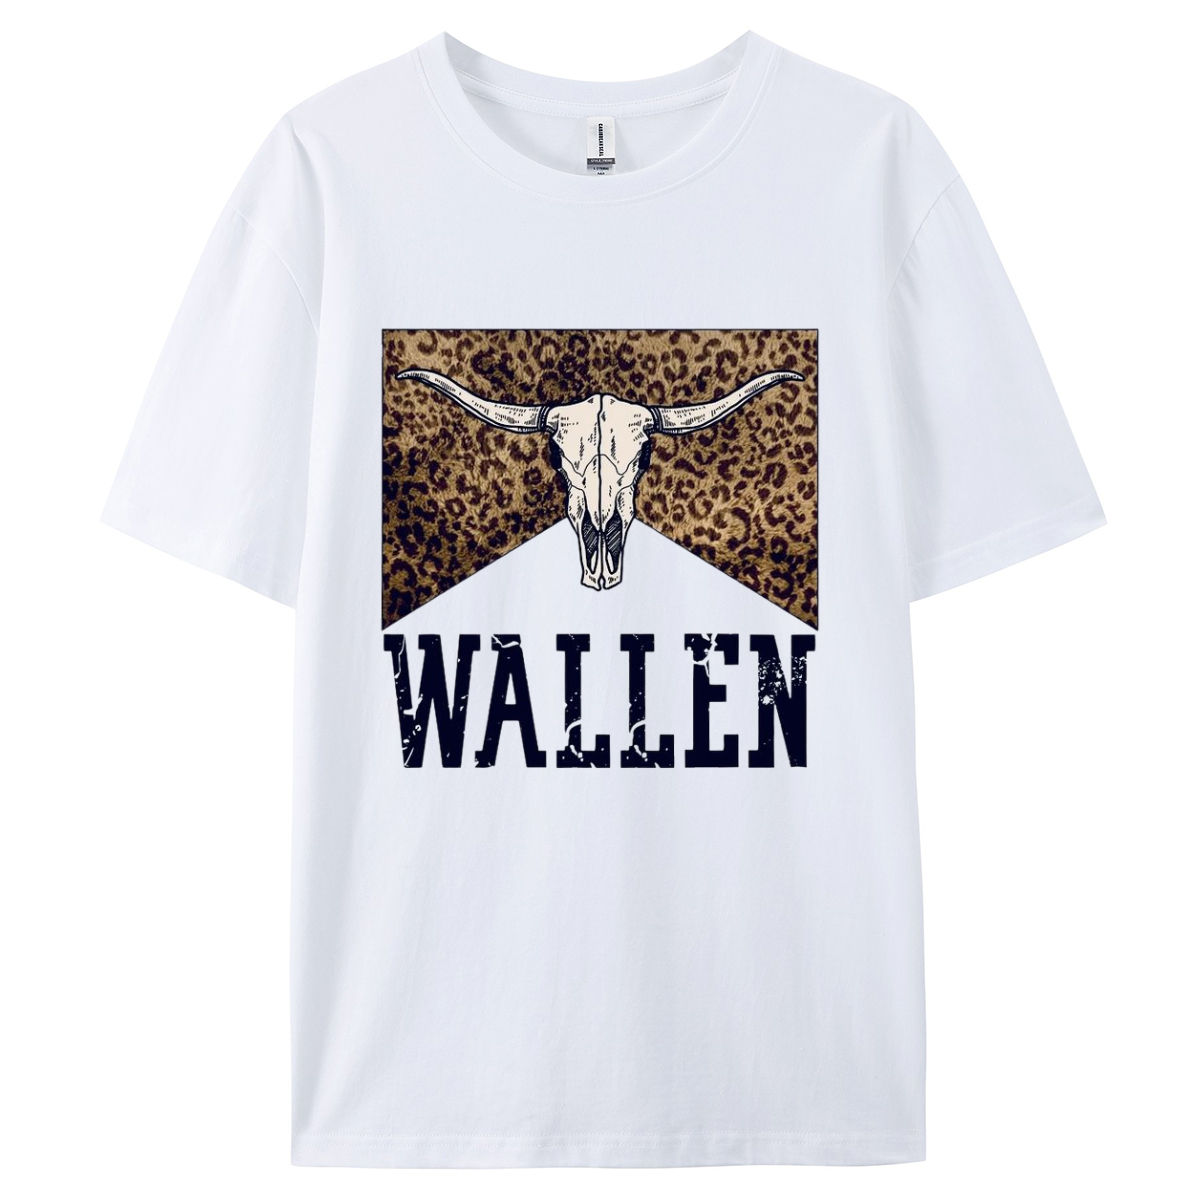 Western graphic tee